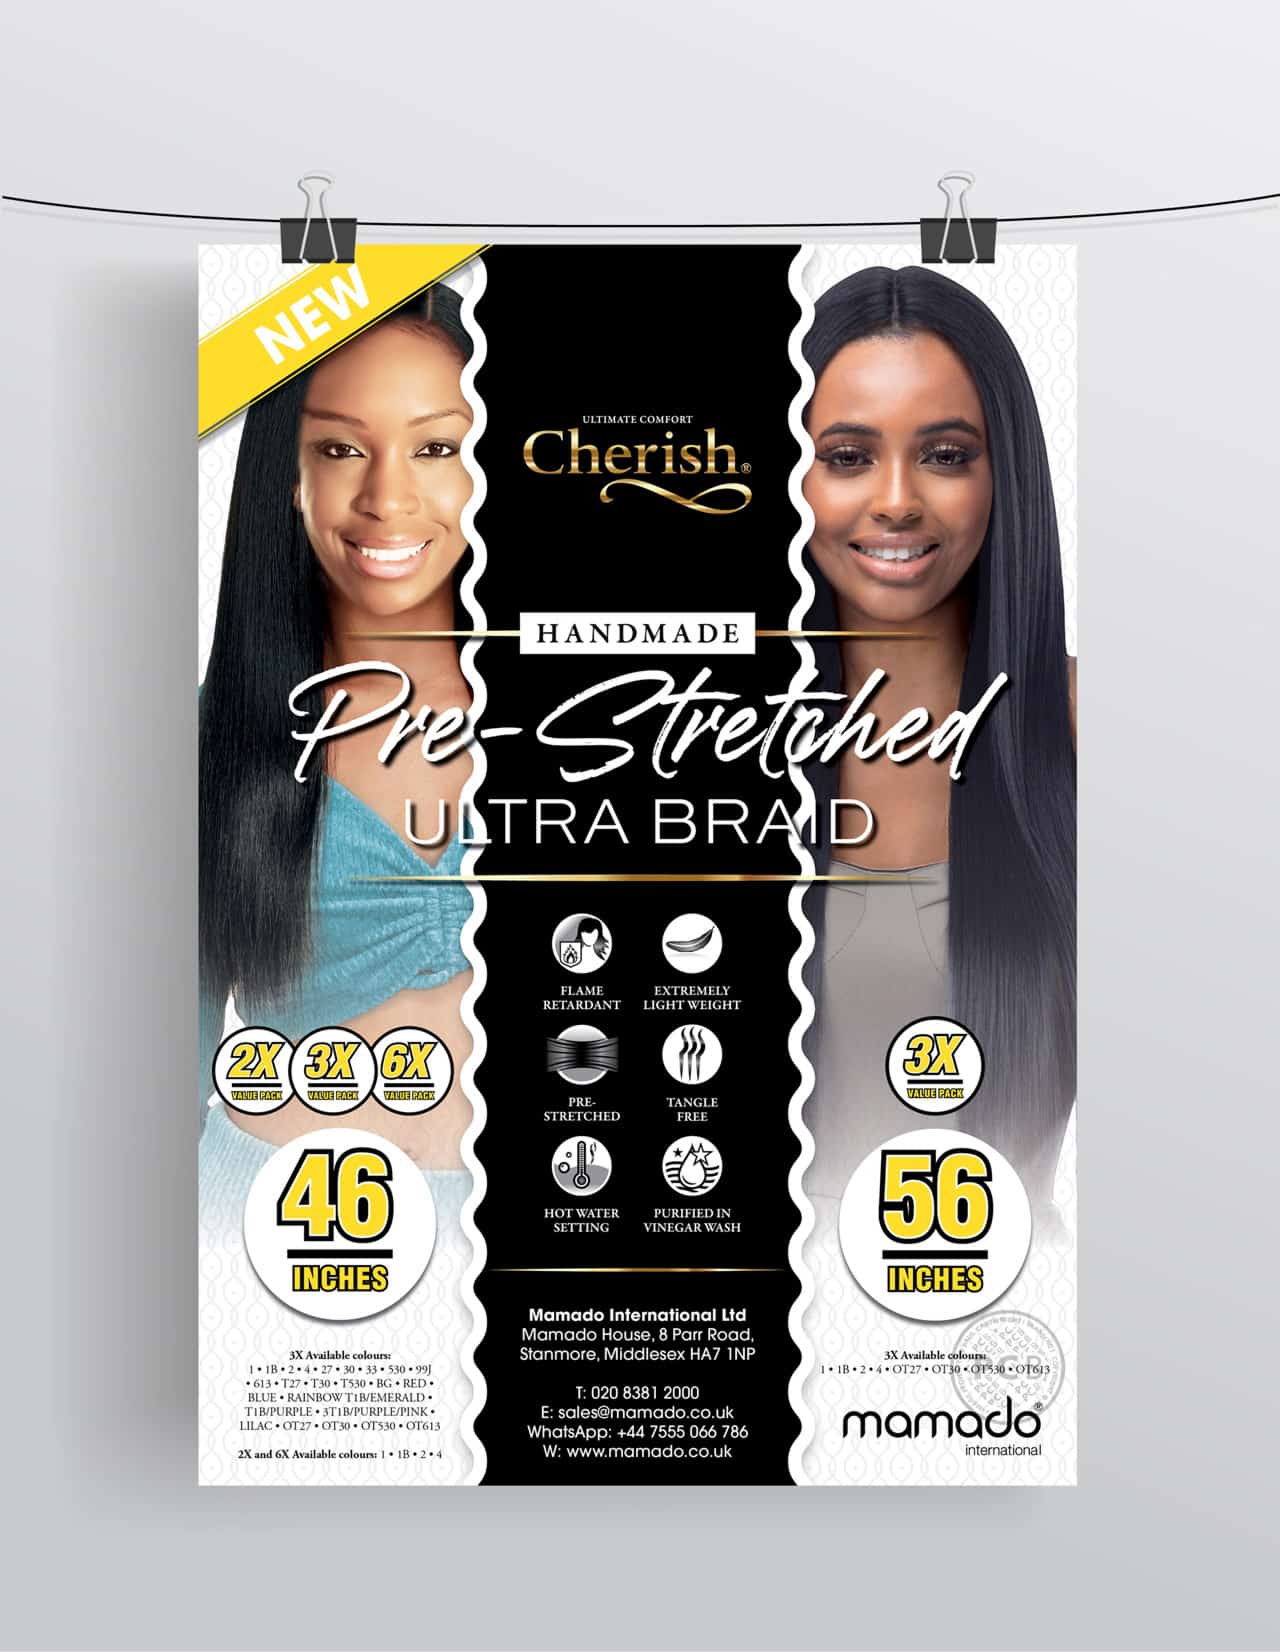 Poster showing two female models wearing pre-stretched ultra braid hair products.